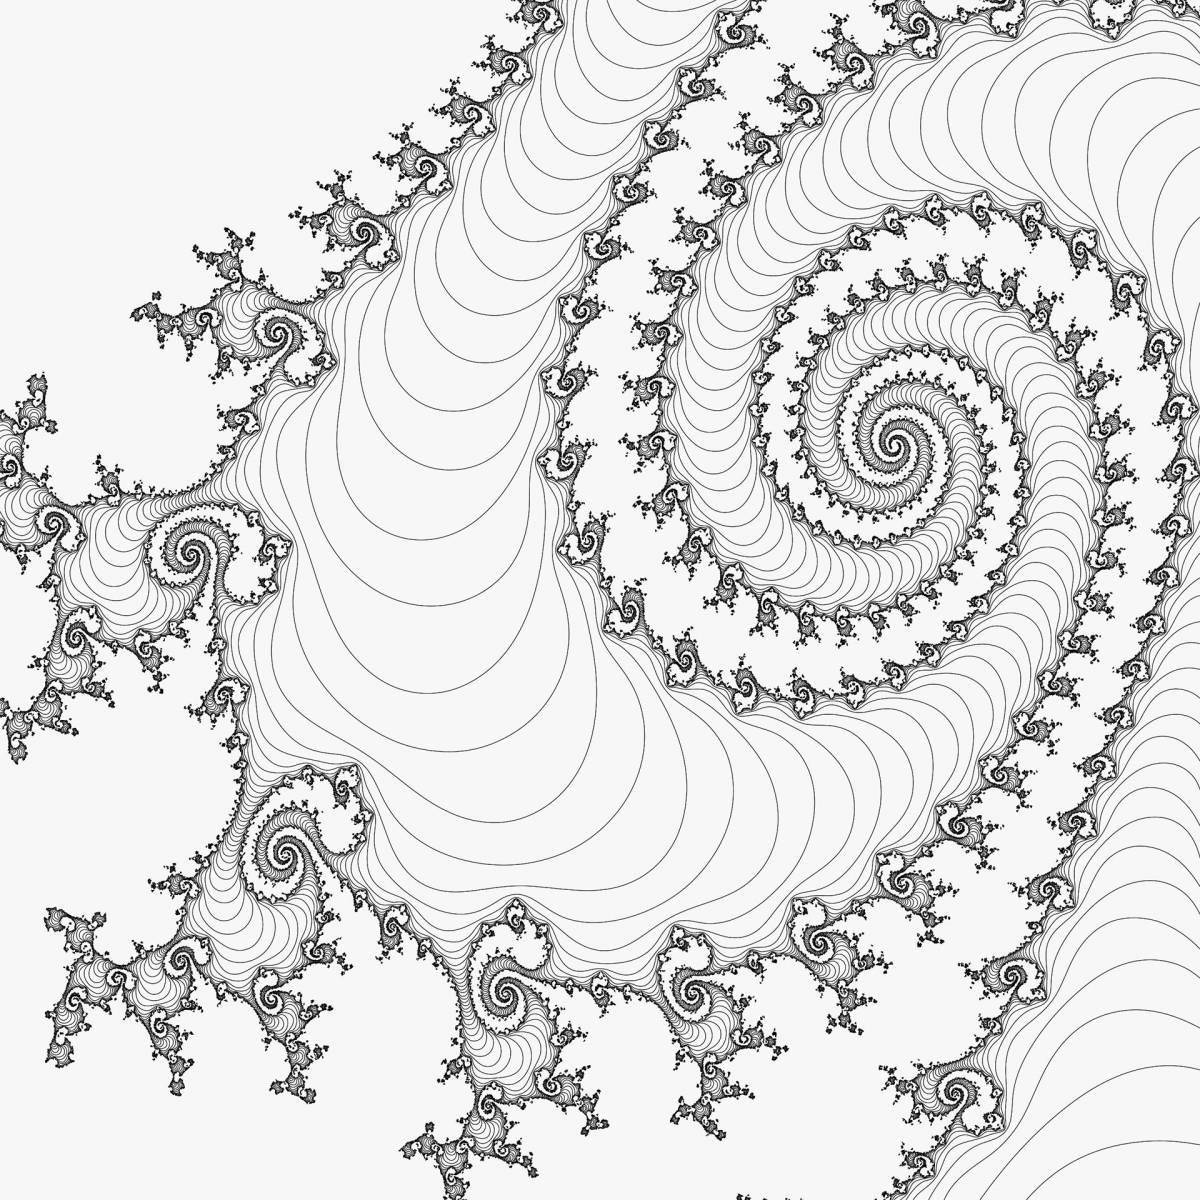 Coloring book improvisation with magnetic spiral